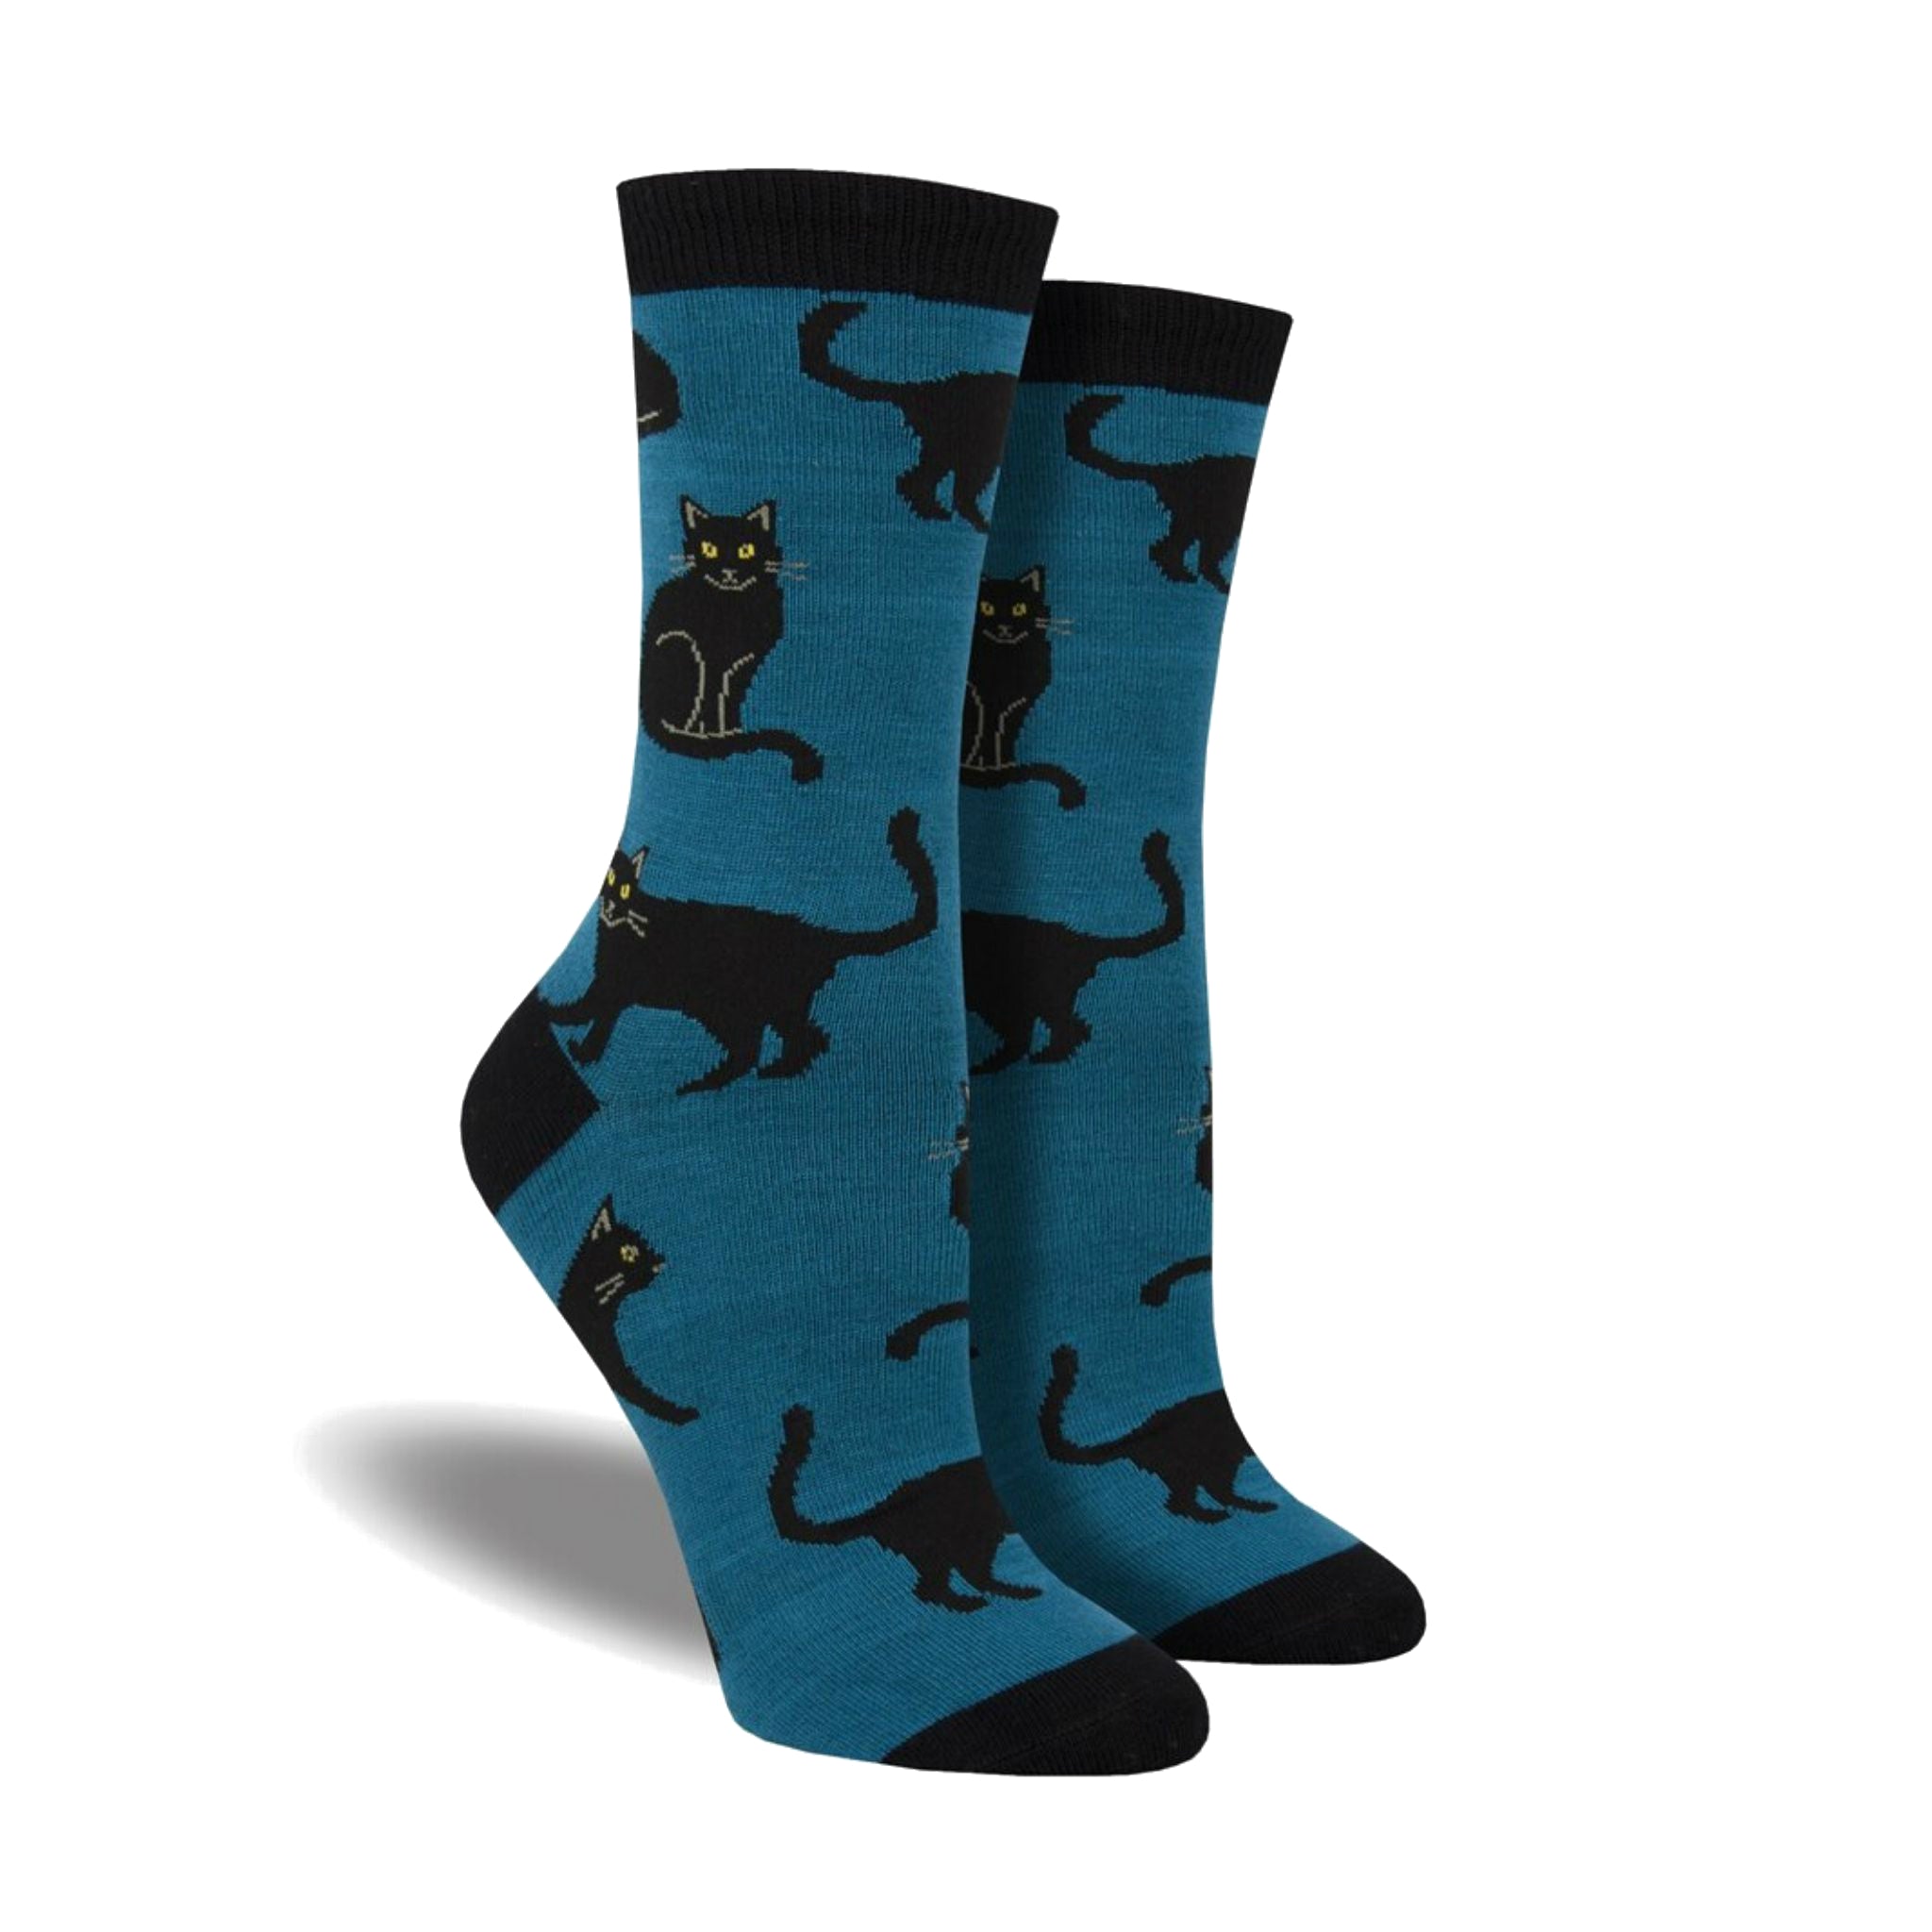 Blue socks with black accents featuring black cats sitting and walking